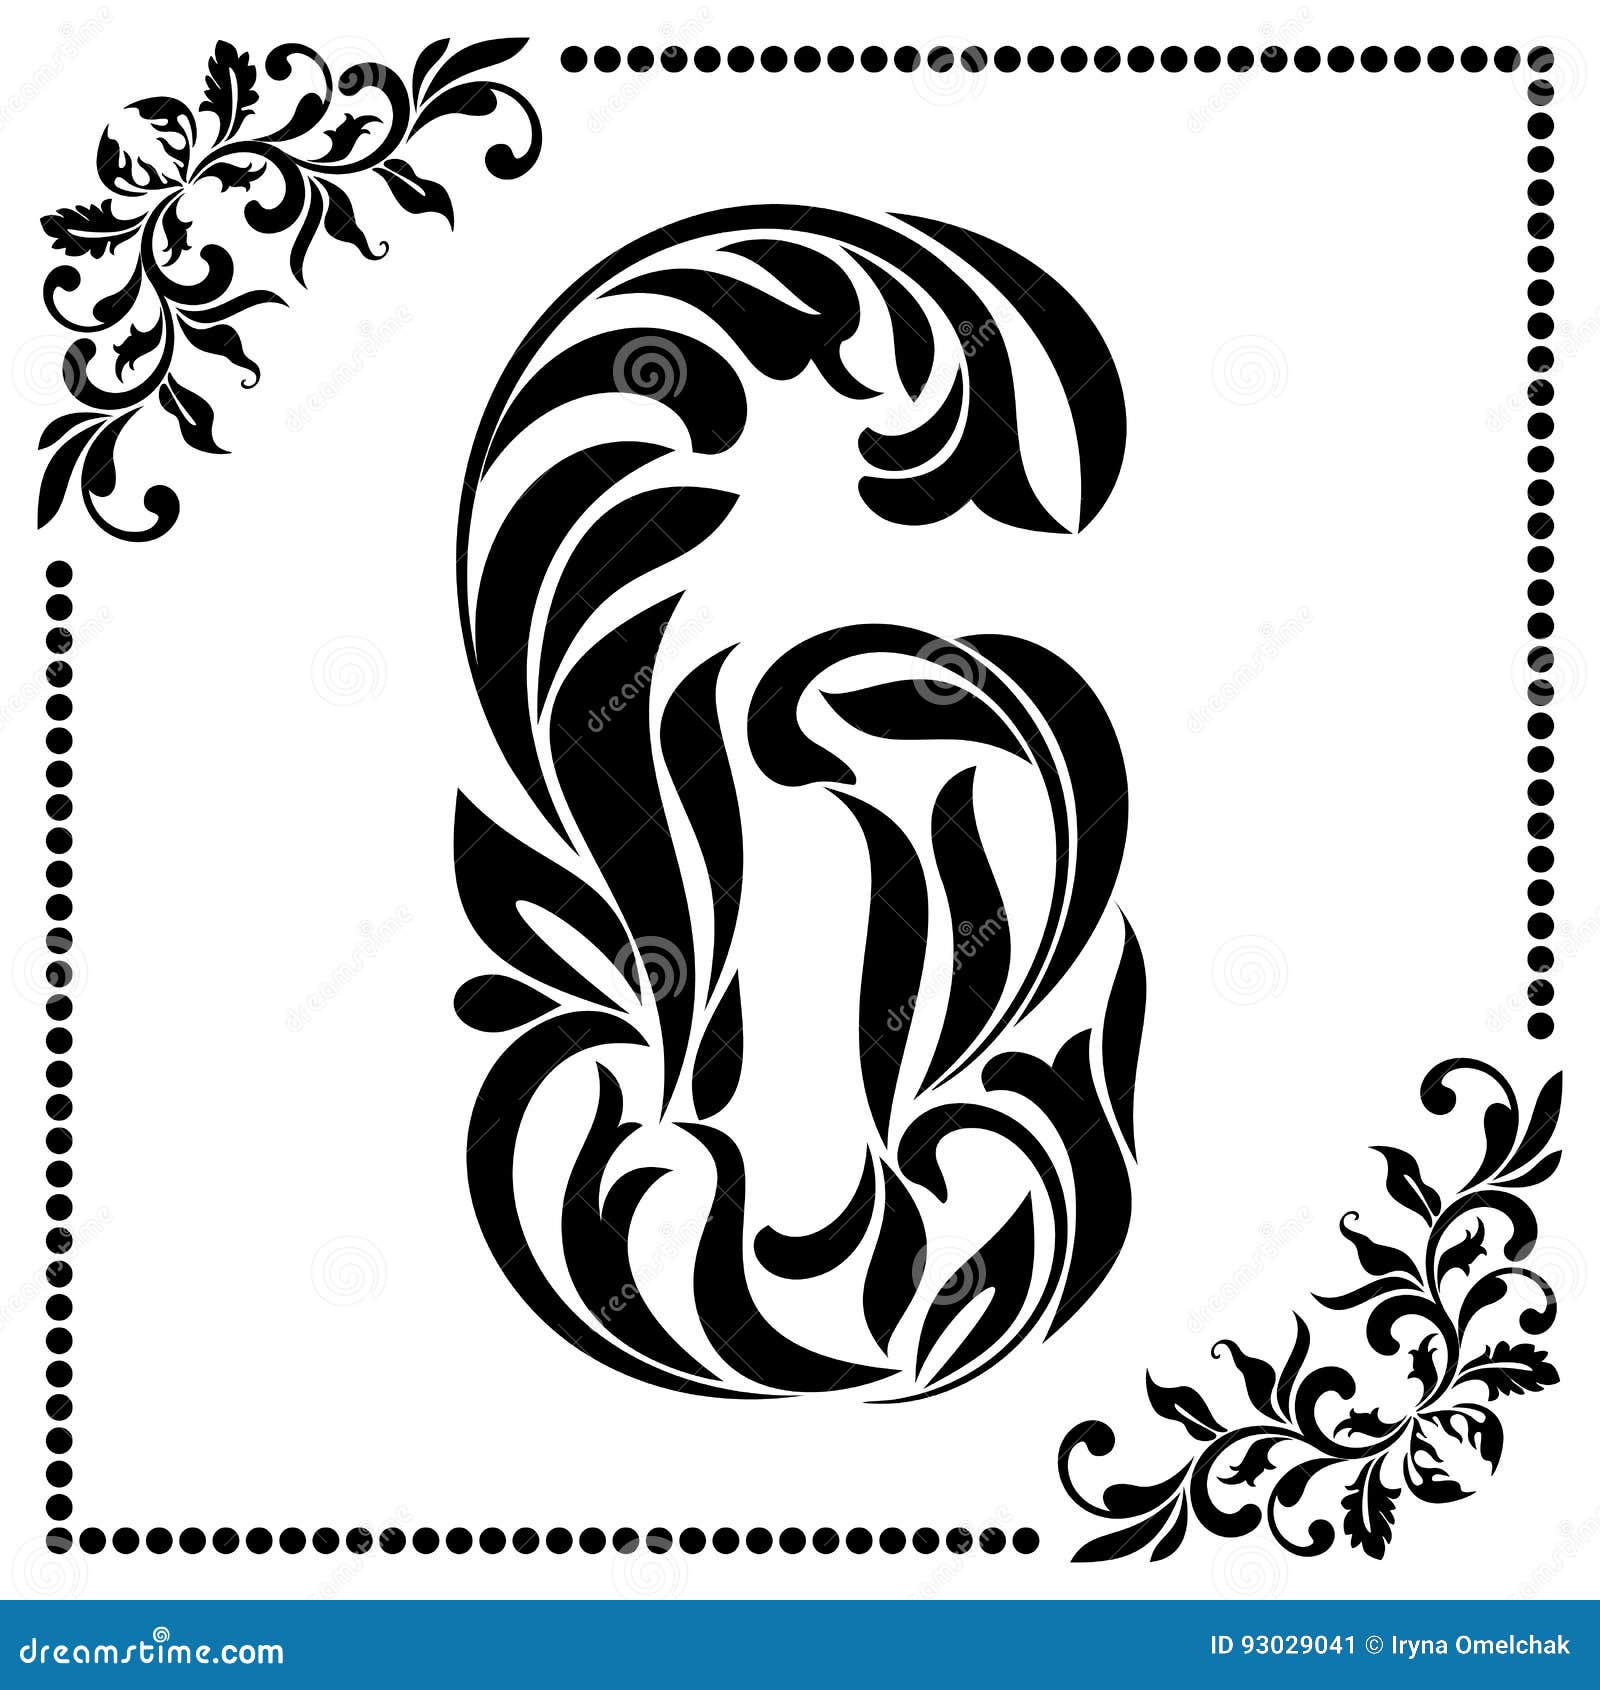 Decorative Font With Swirls And Floral Elements. Ornate Decorate Stock ...